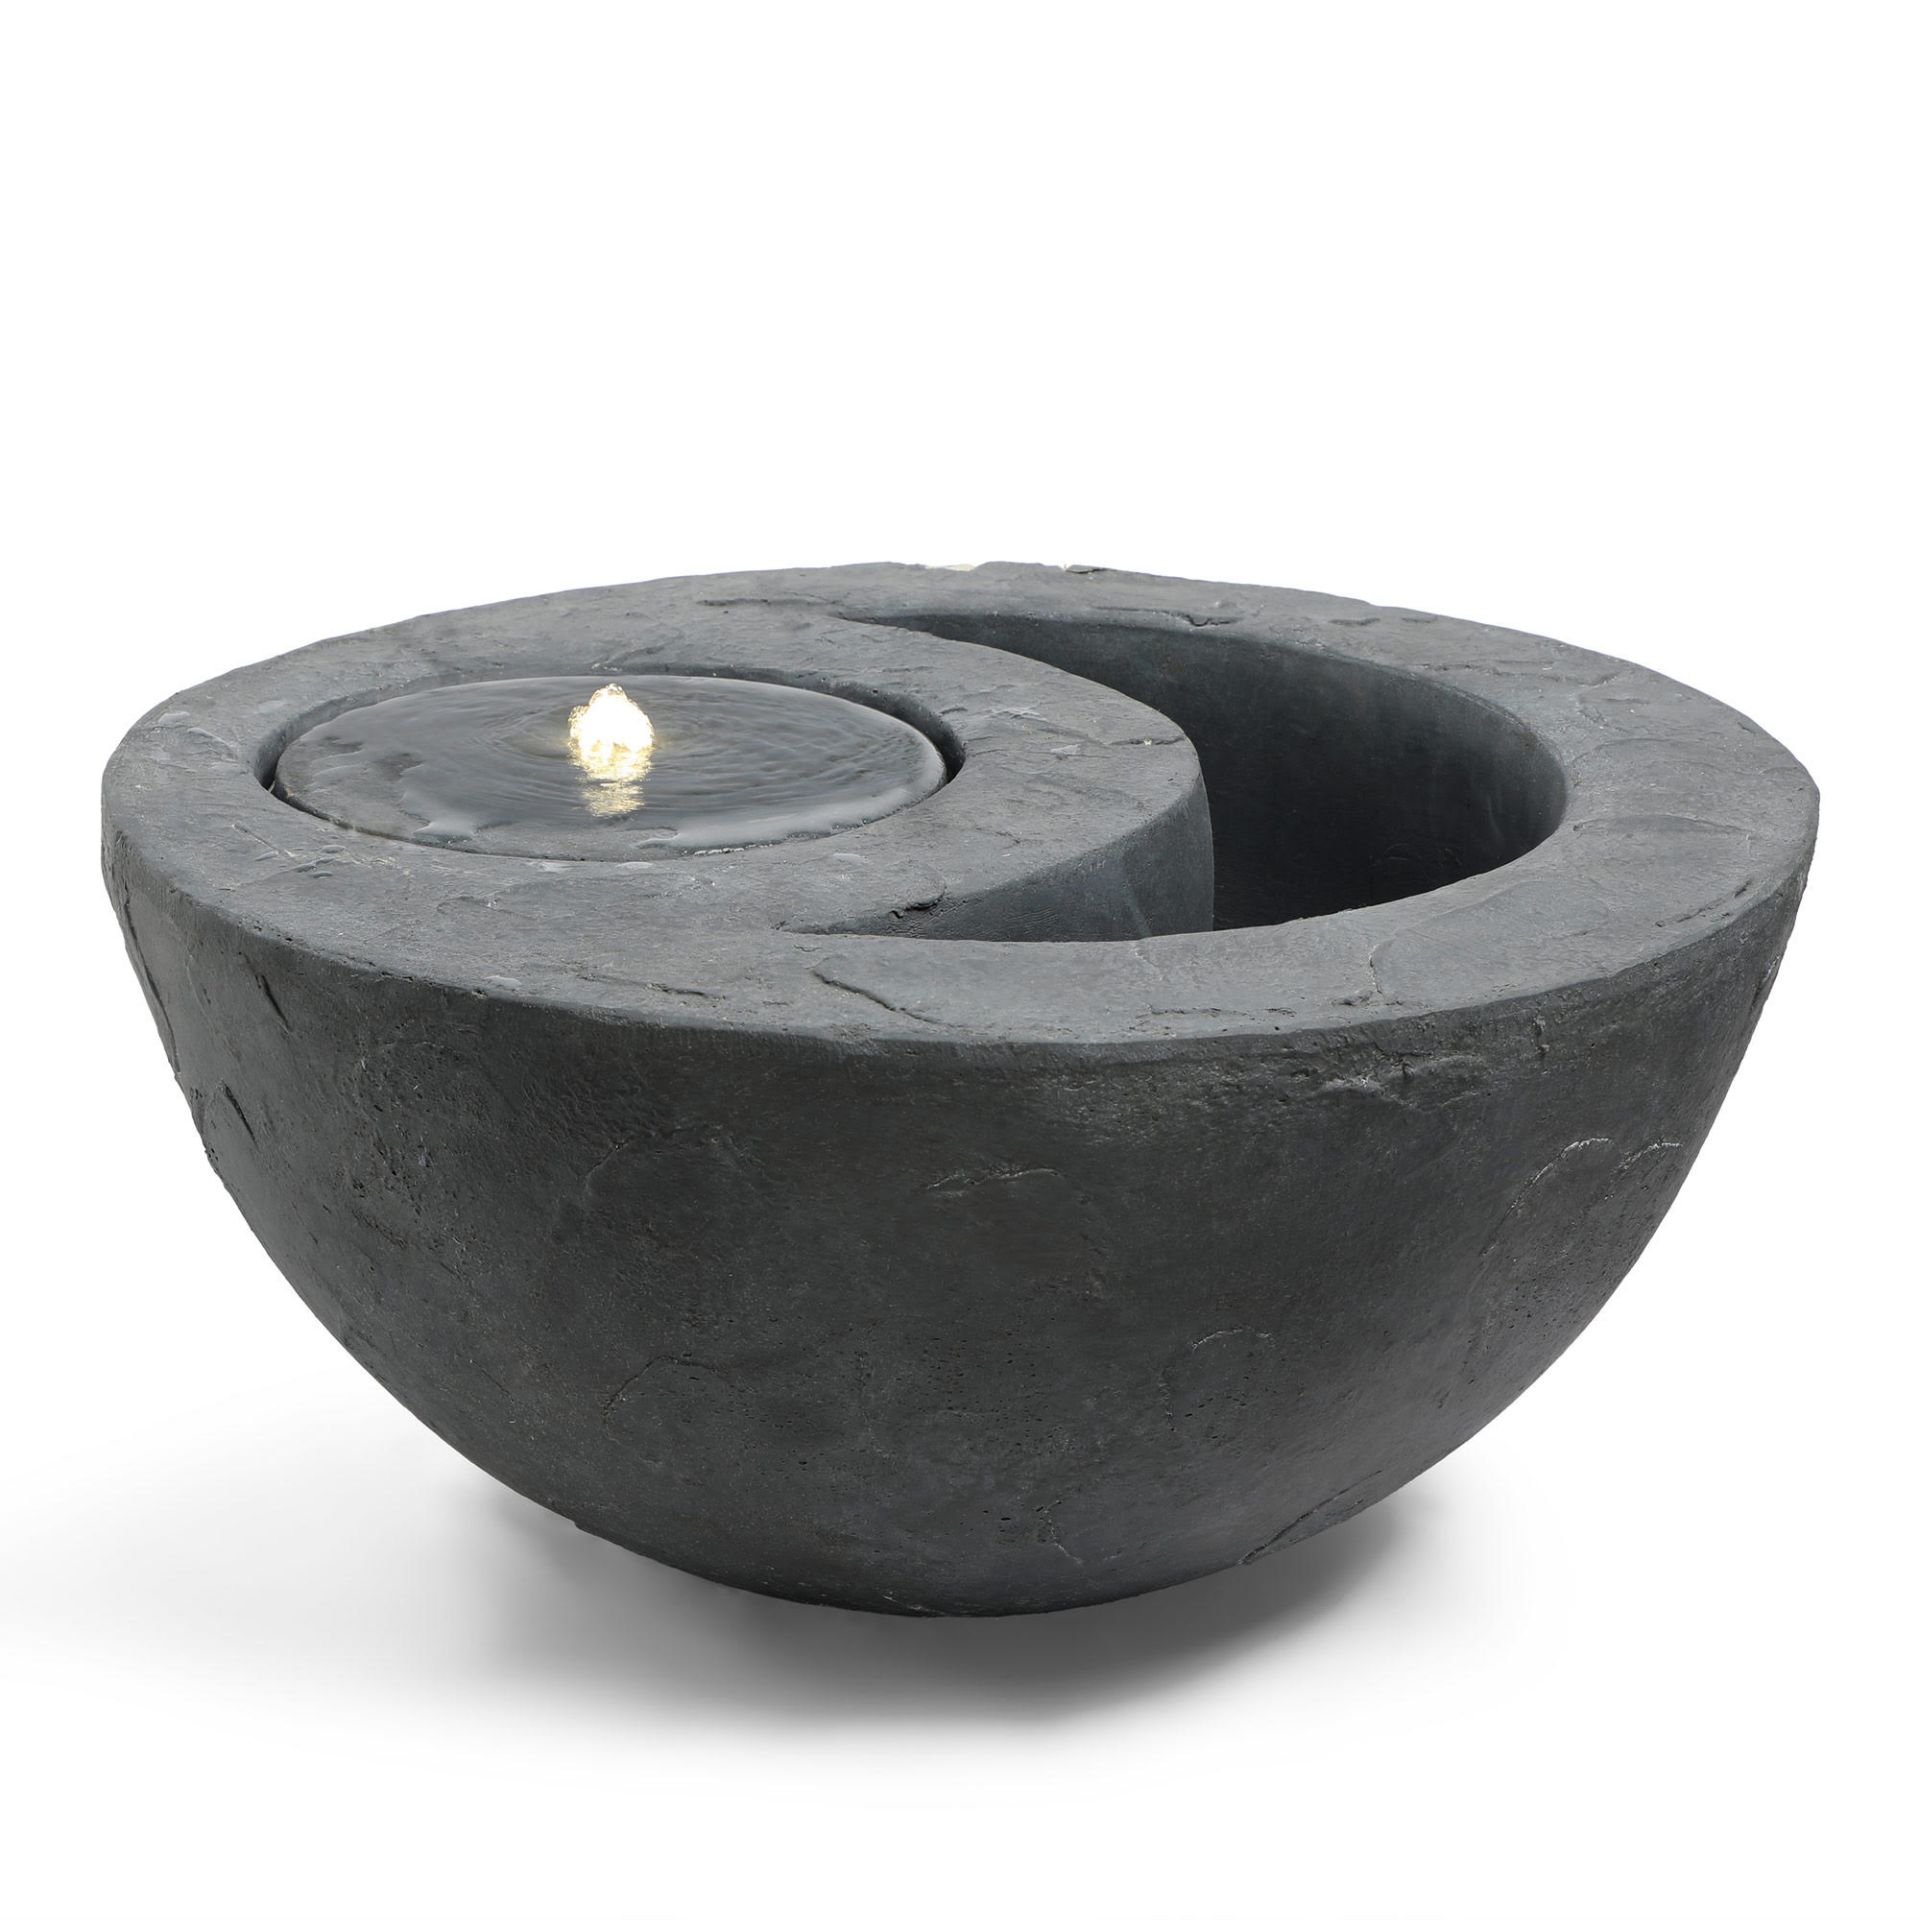 Trade Lot 5 x New & Boxed Dual Water Feature and Planter. RRP £299.99 (REF726) - Garden Bowl - Image 5 of 8